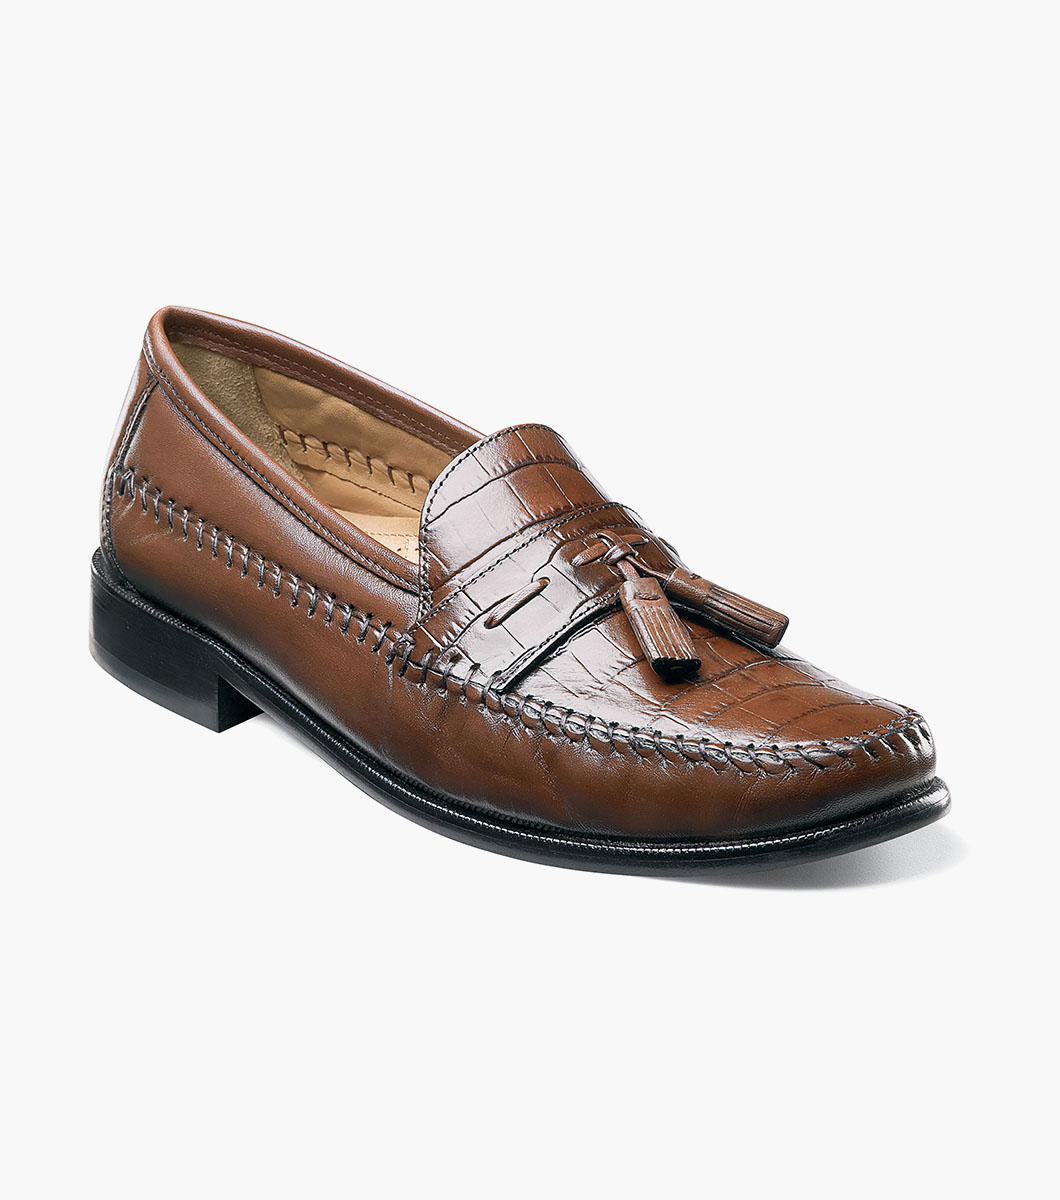 florsheim shoes loafers